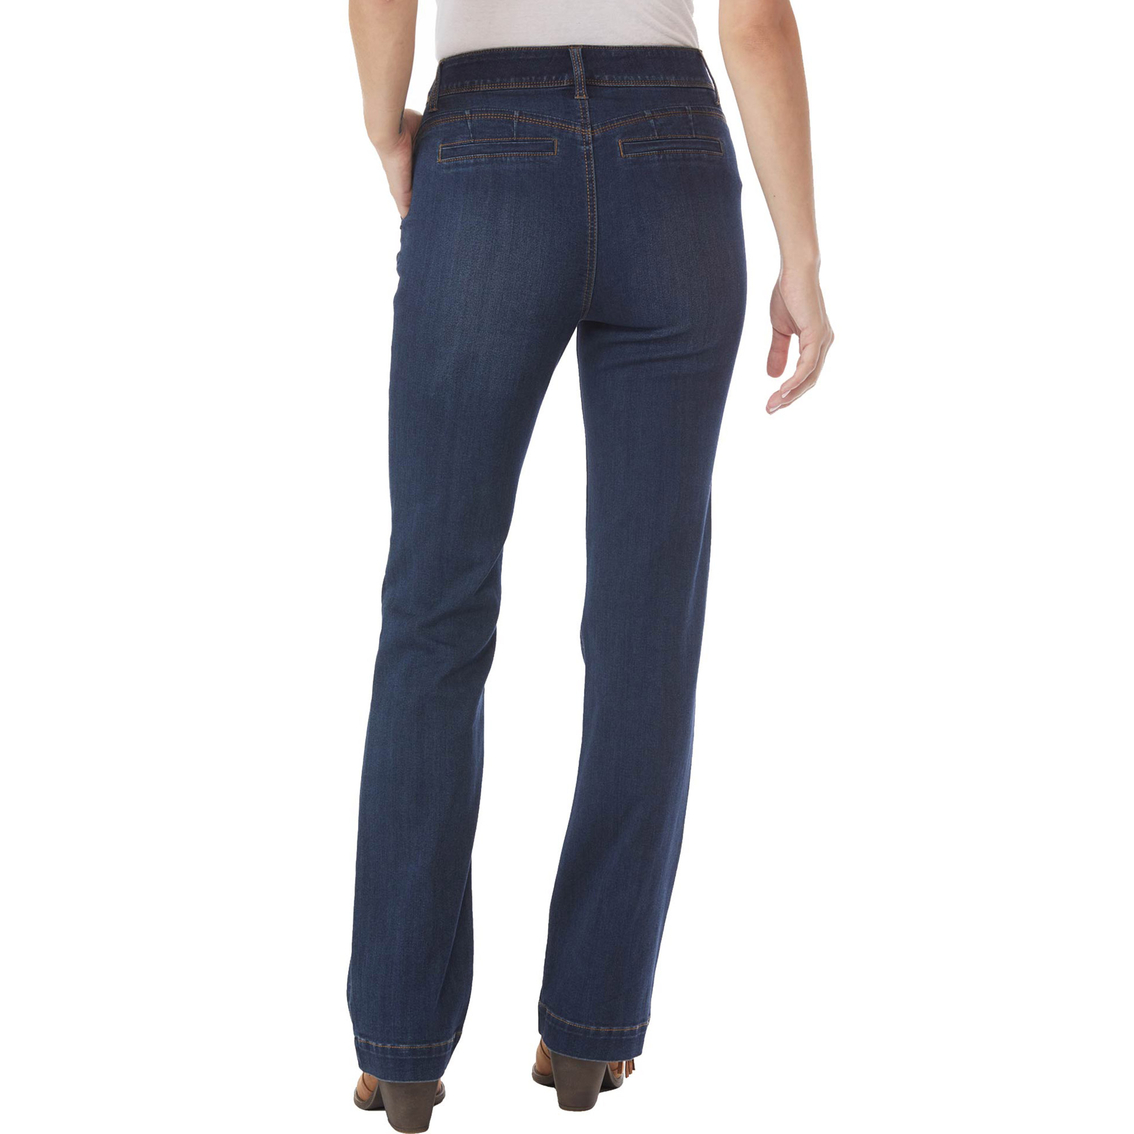 Jw Goddess Trouser Jeans | Jeans | Clothing & Accessories | Shop The ...